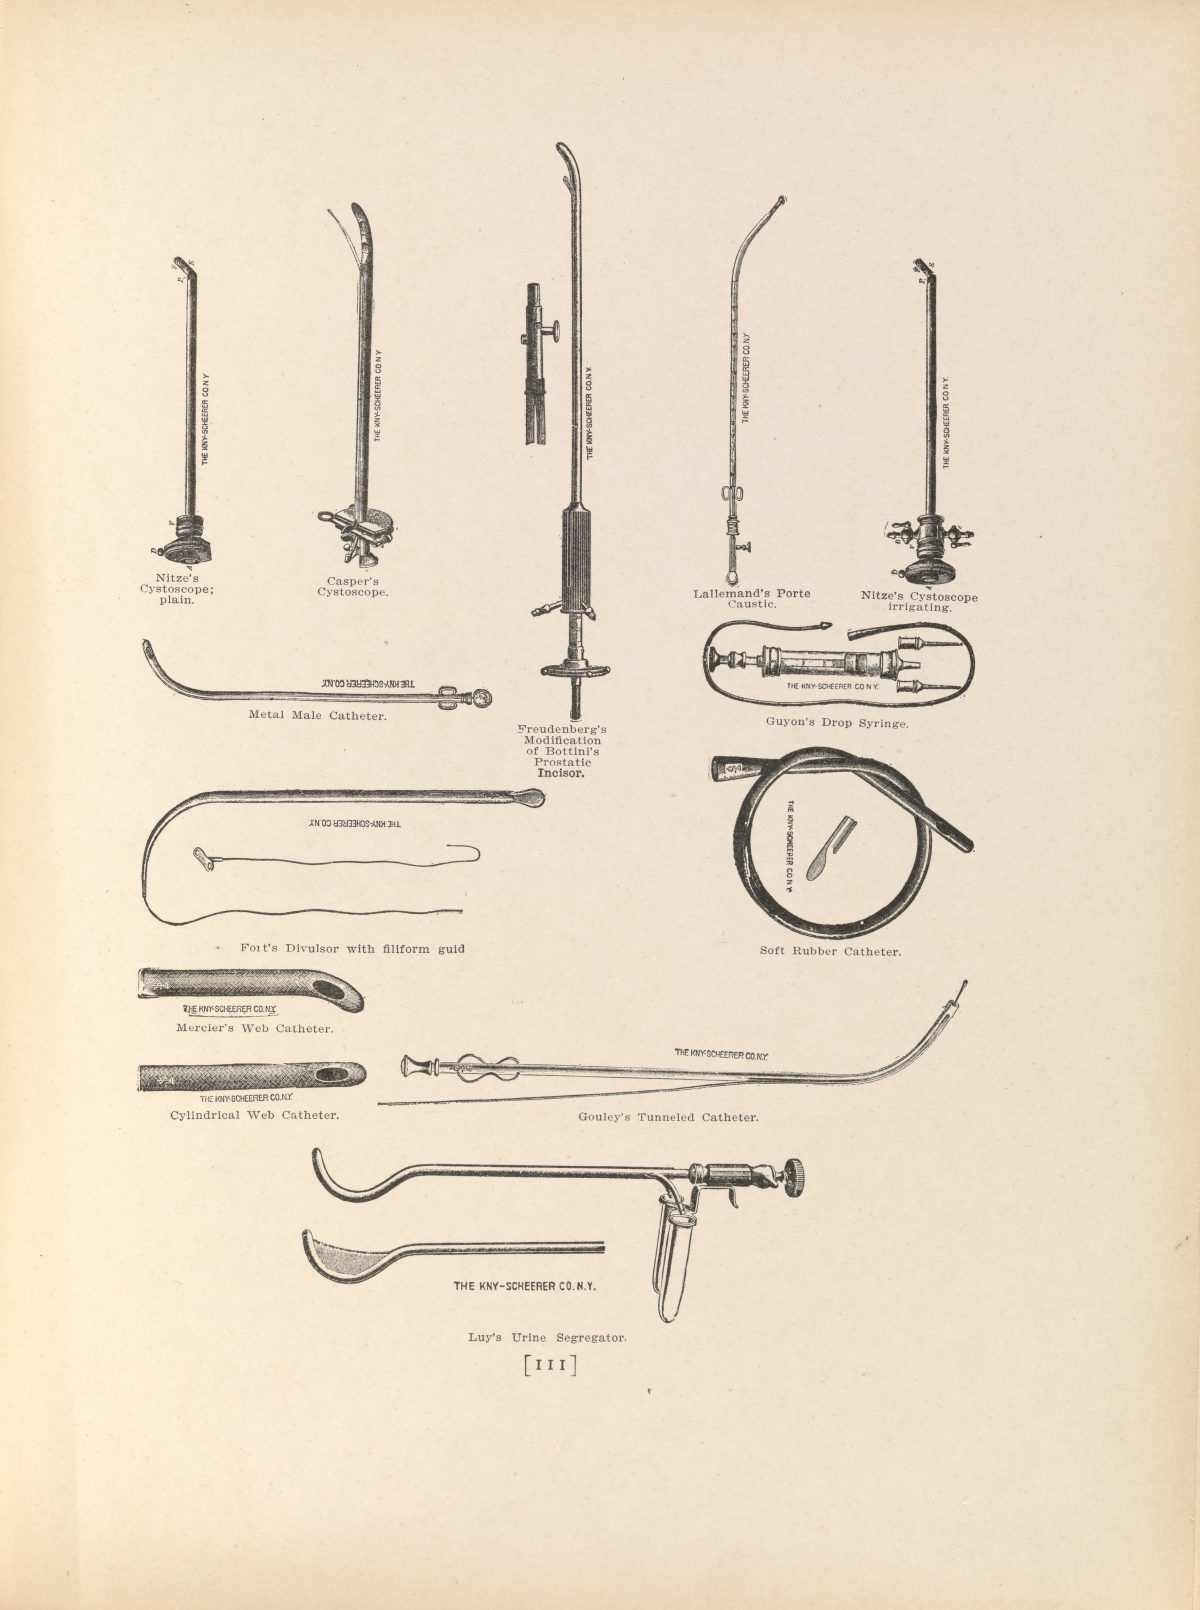 Plate XXXIV. Surgical instruments used for external urethrotomy in prostatectomy (removal of part of the prostate gland).